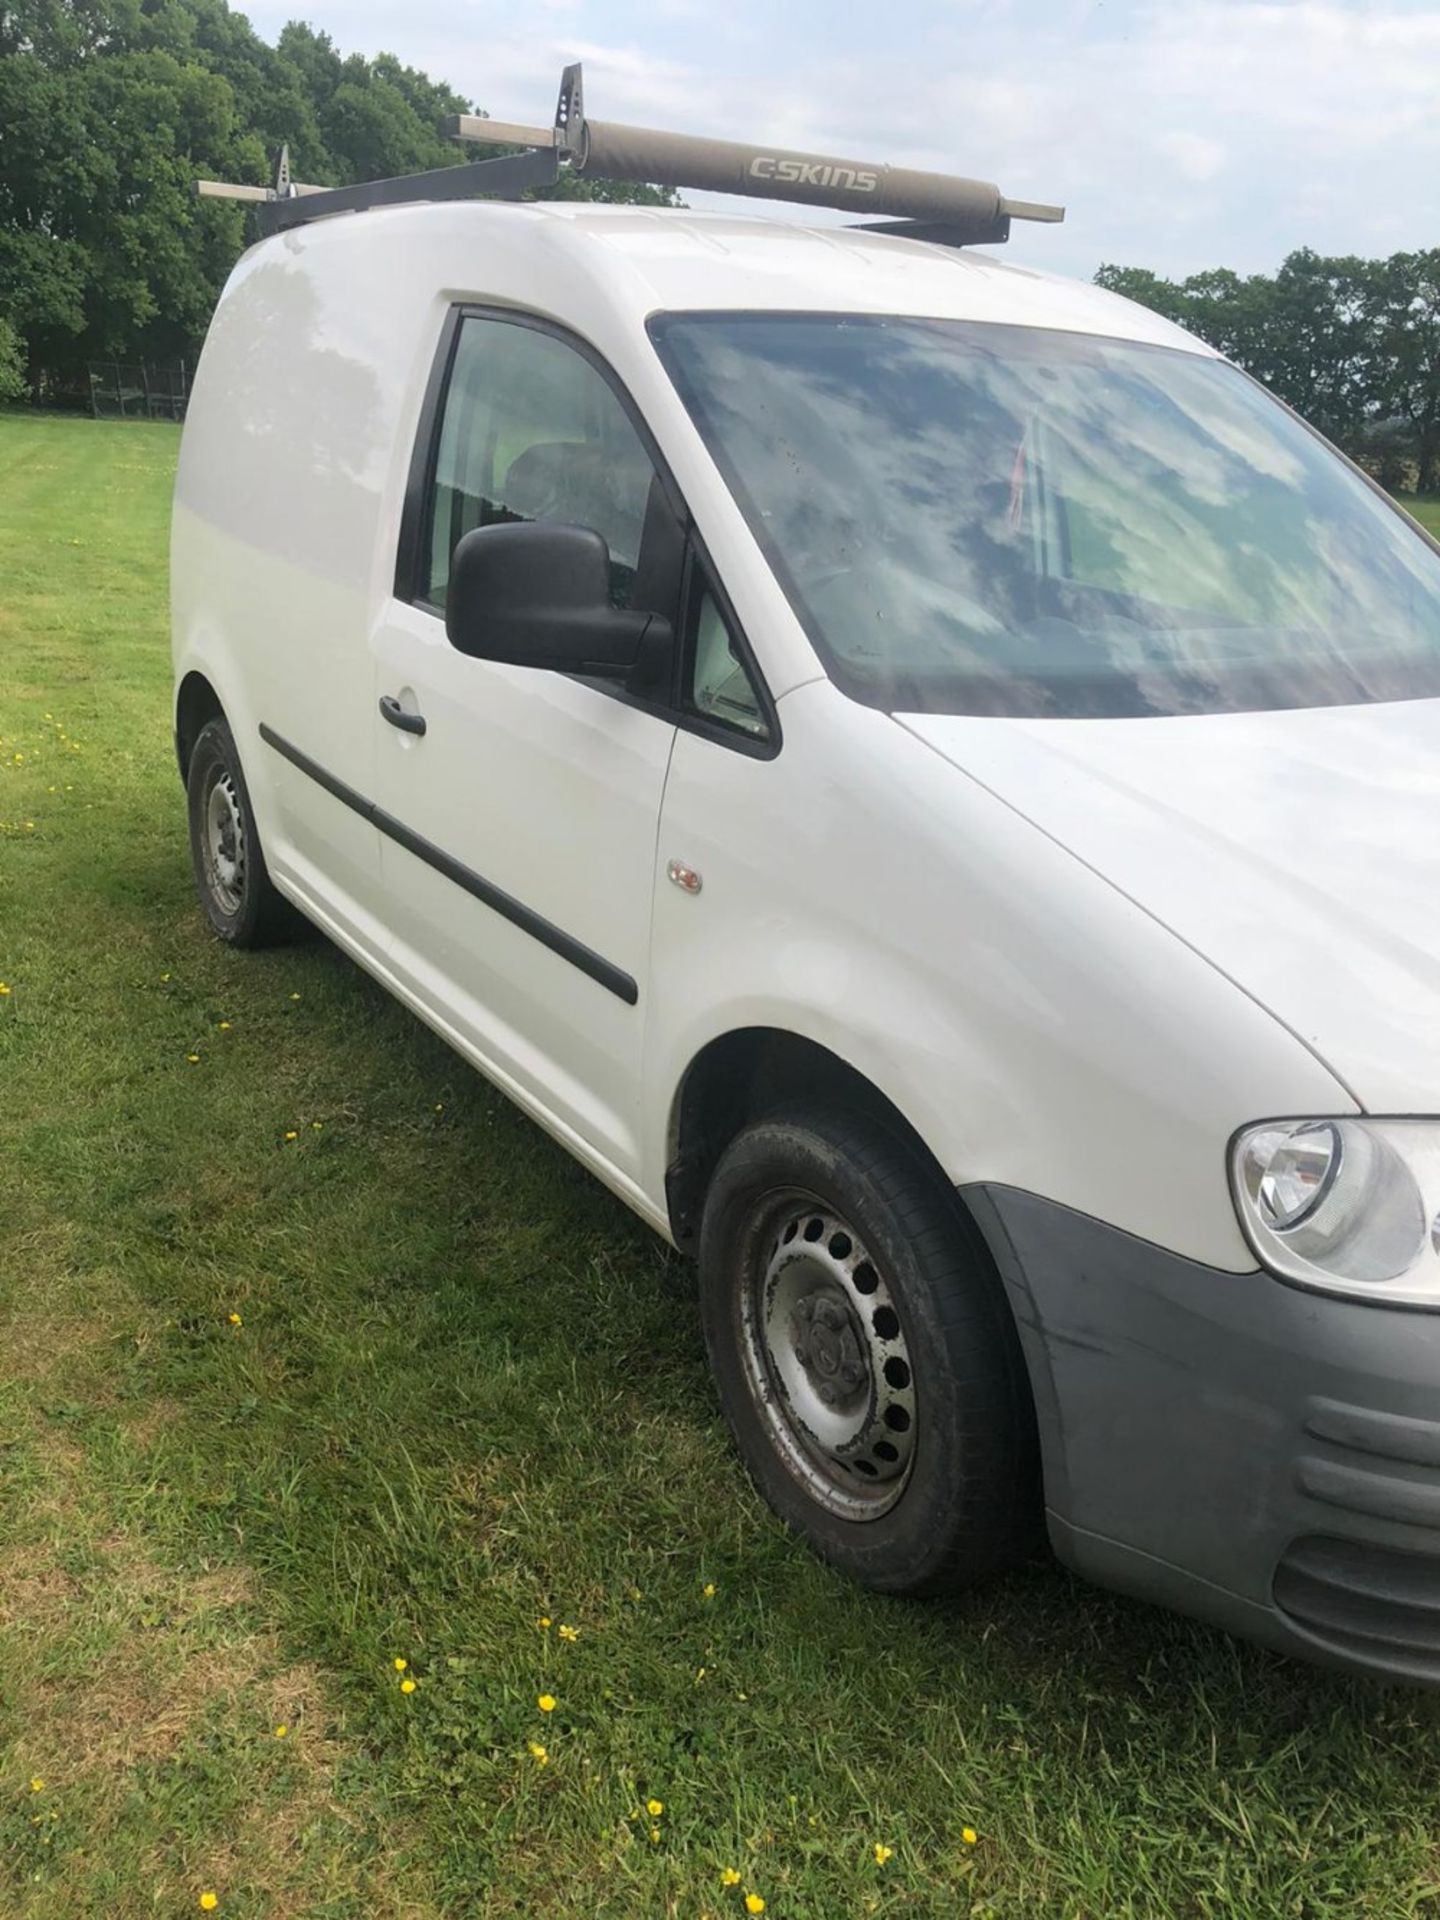 VOLKSWAGON CADDY PANEL VAN REG:LG09 0NL WITH V5 AND TESTED UNTIL SEPTEMBER 137051 REC MILES. PLEASE - Image 10 of 16